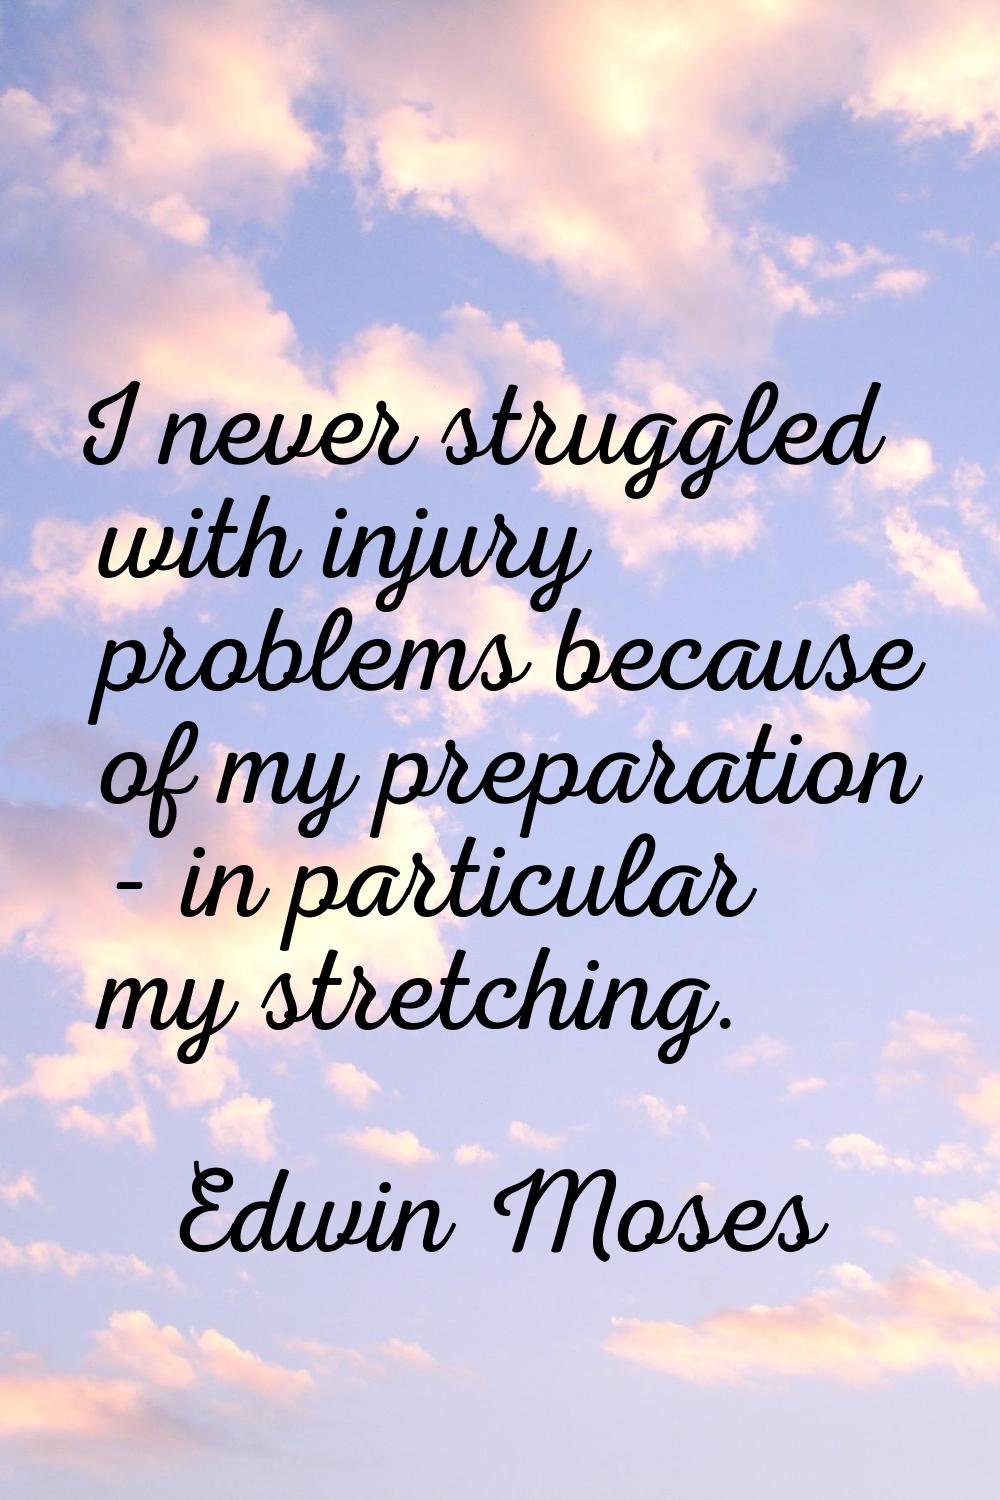 I never struggled with injury problems because of my preparation - in particular my stretching.